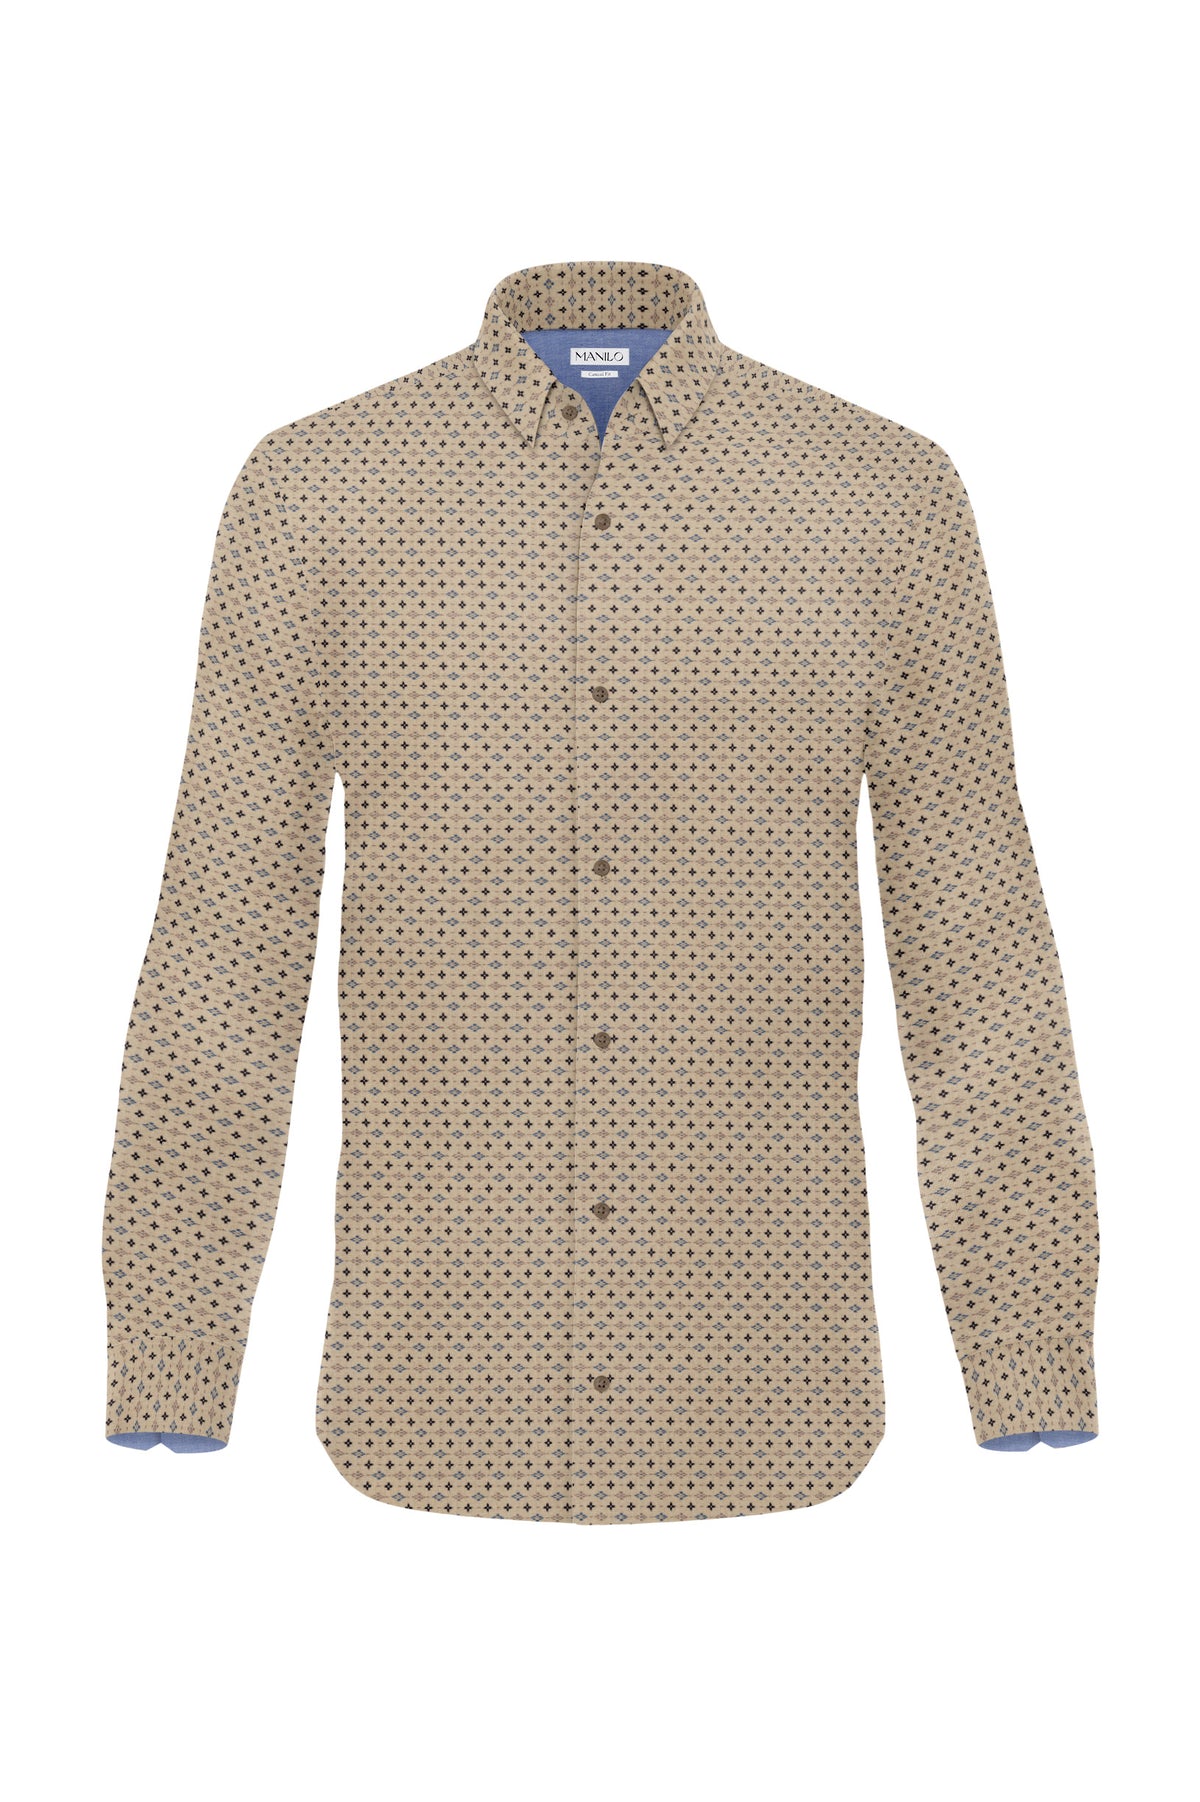 Casual shirt with graphic pattern in beige (Art. 2232-C)